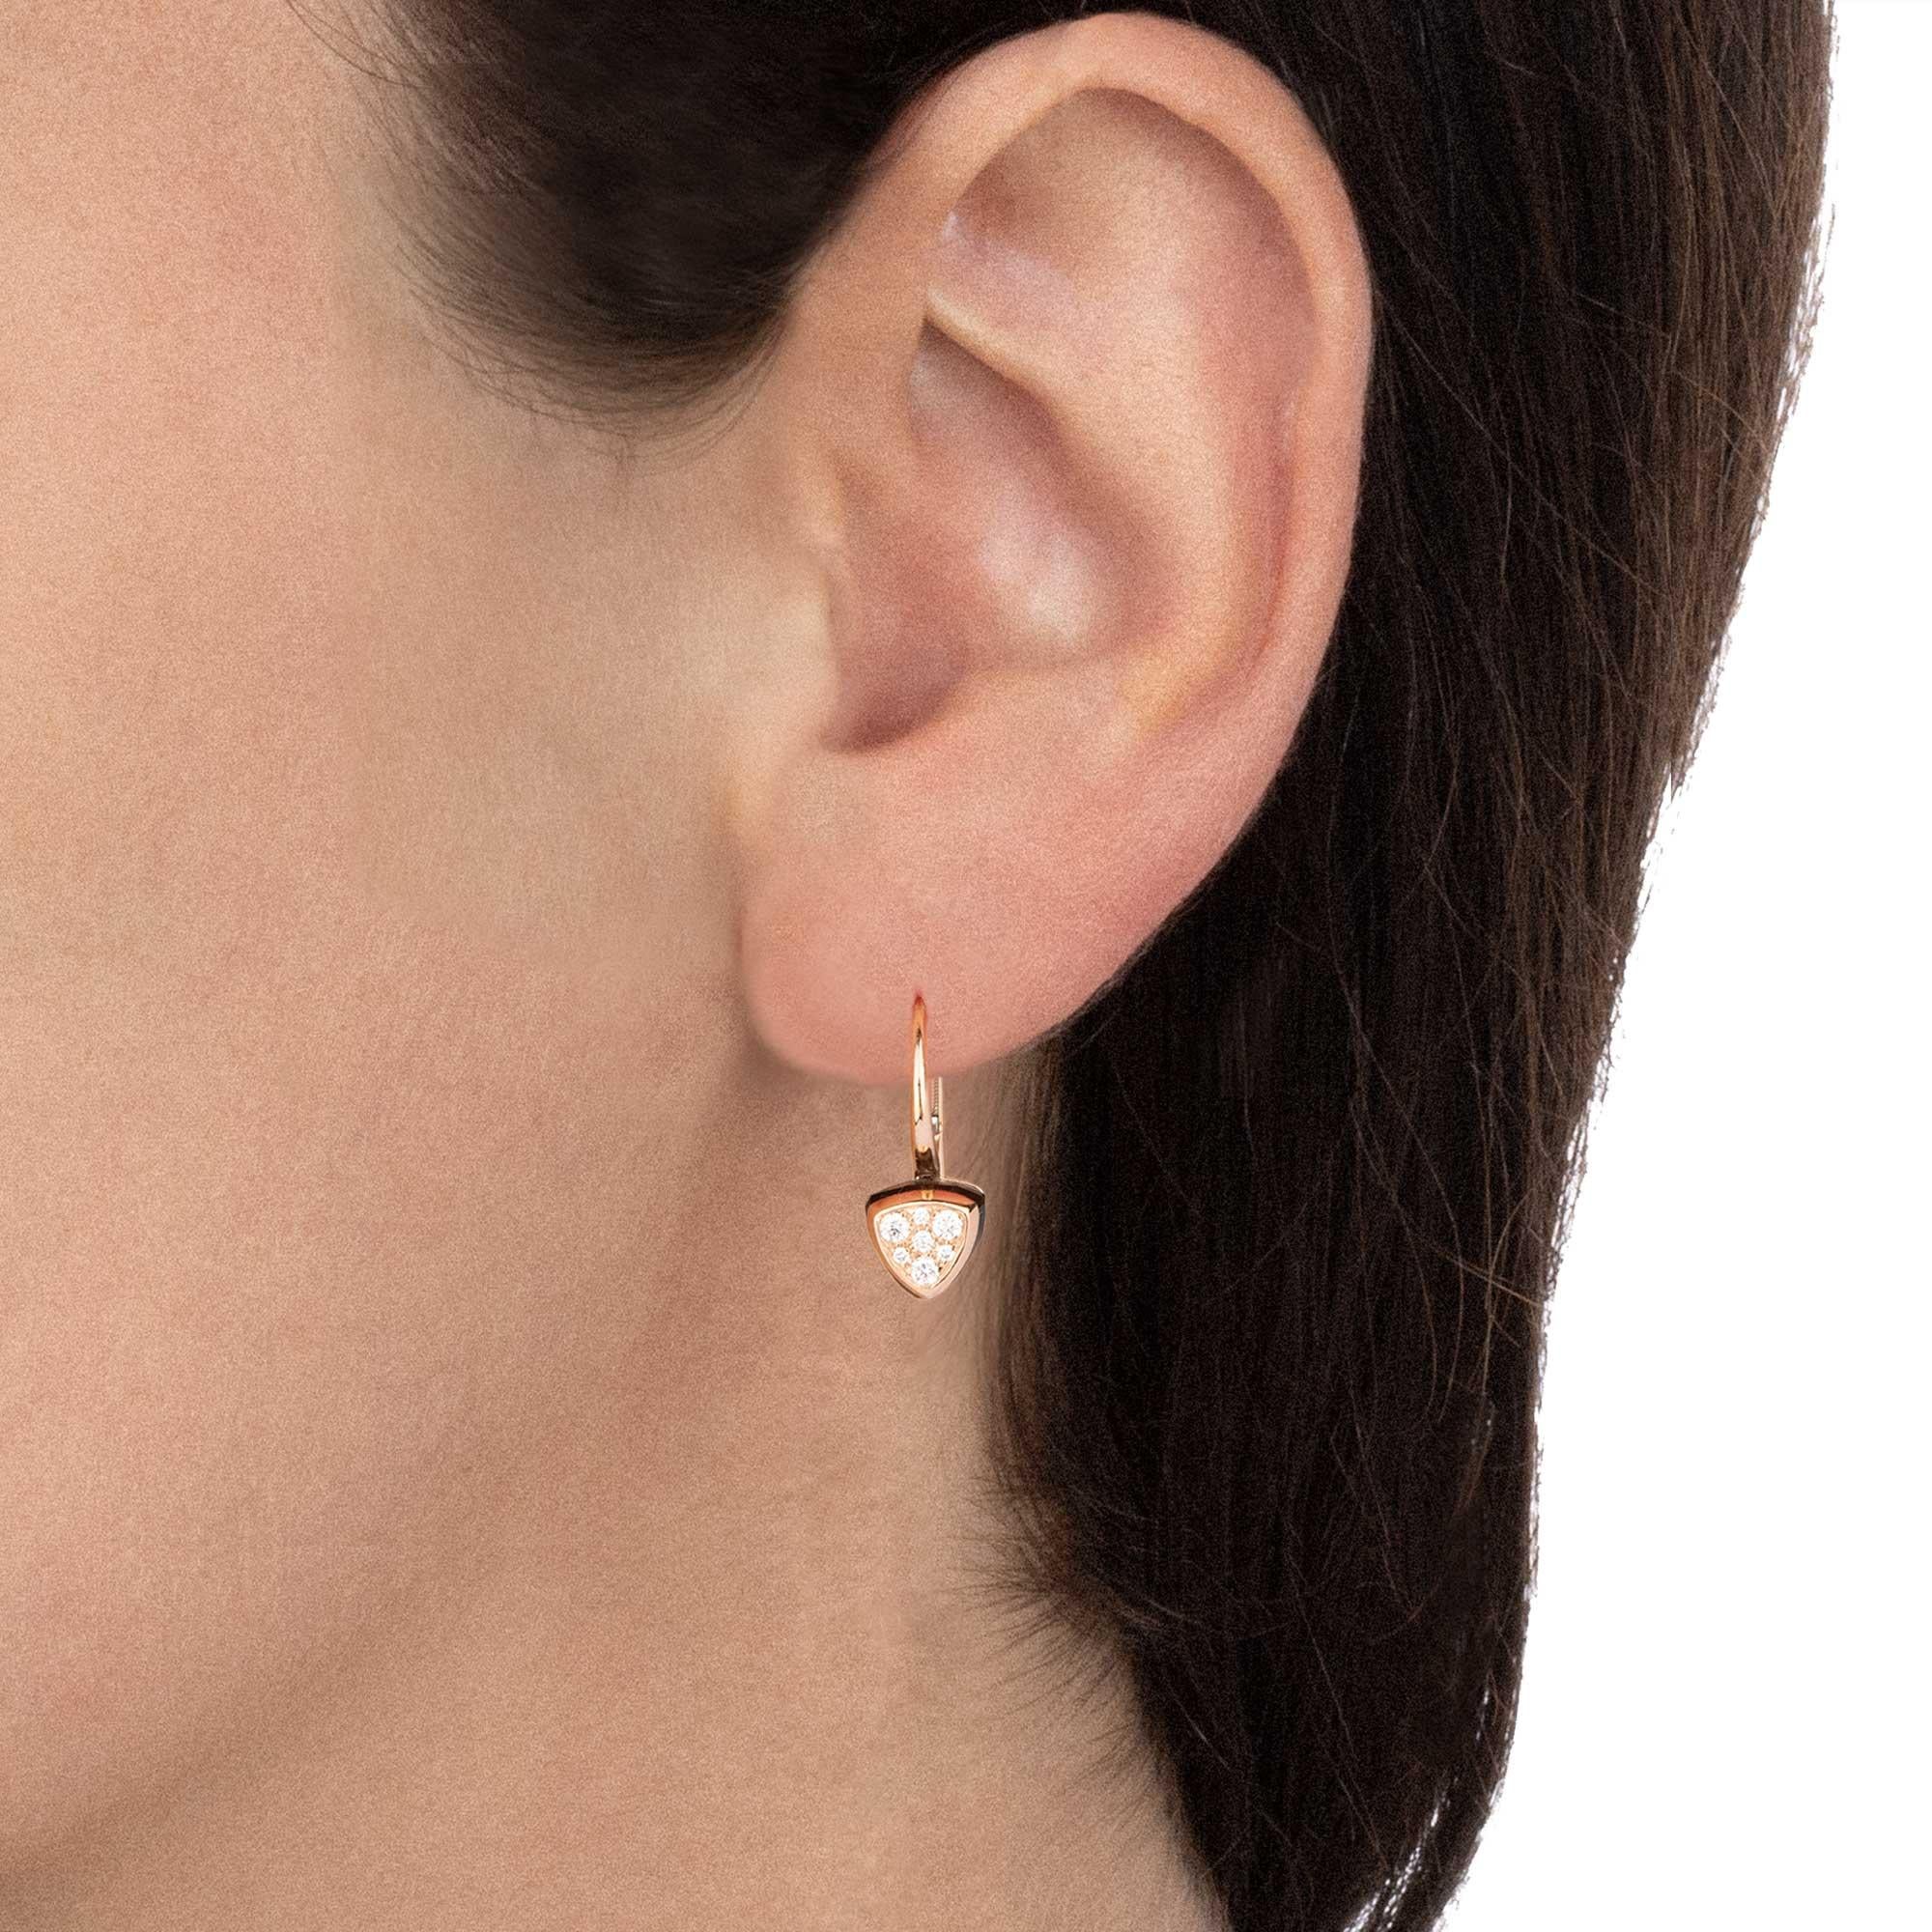 Smoky quartz triangles on rose gold support beautiful diamonds. A conjunction f elements for a jewel of timeless elegance.

Cast polish rose gold earrings, triangle cut smoky quartz 3.90 ct and diamonds pavé of 0.32 ct, pin closure.